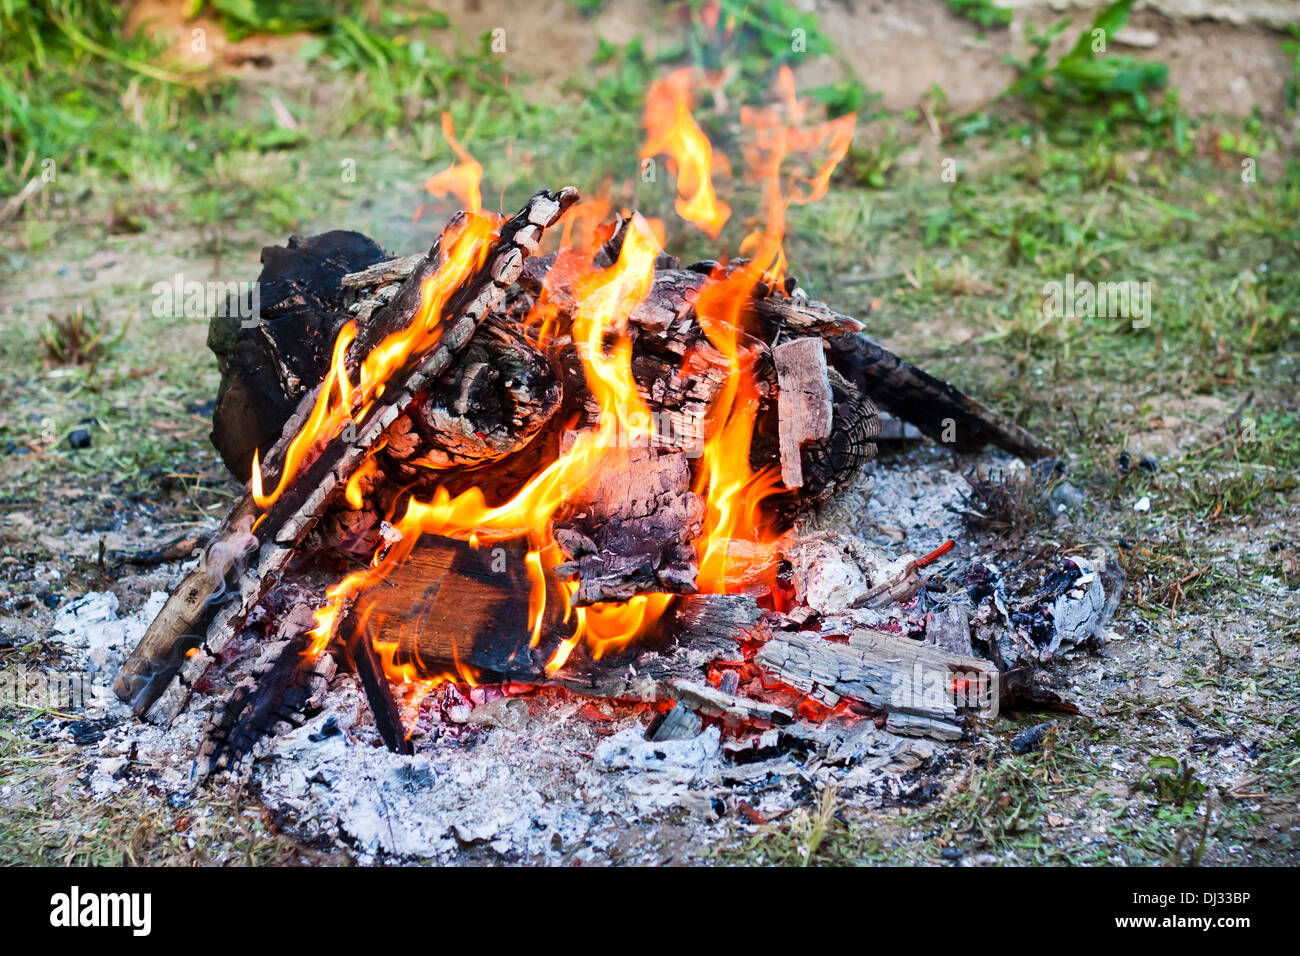 Campfire in nature Stock Photo - Alamy